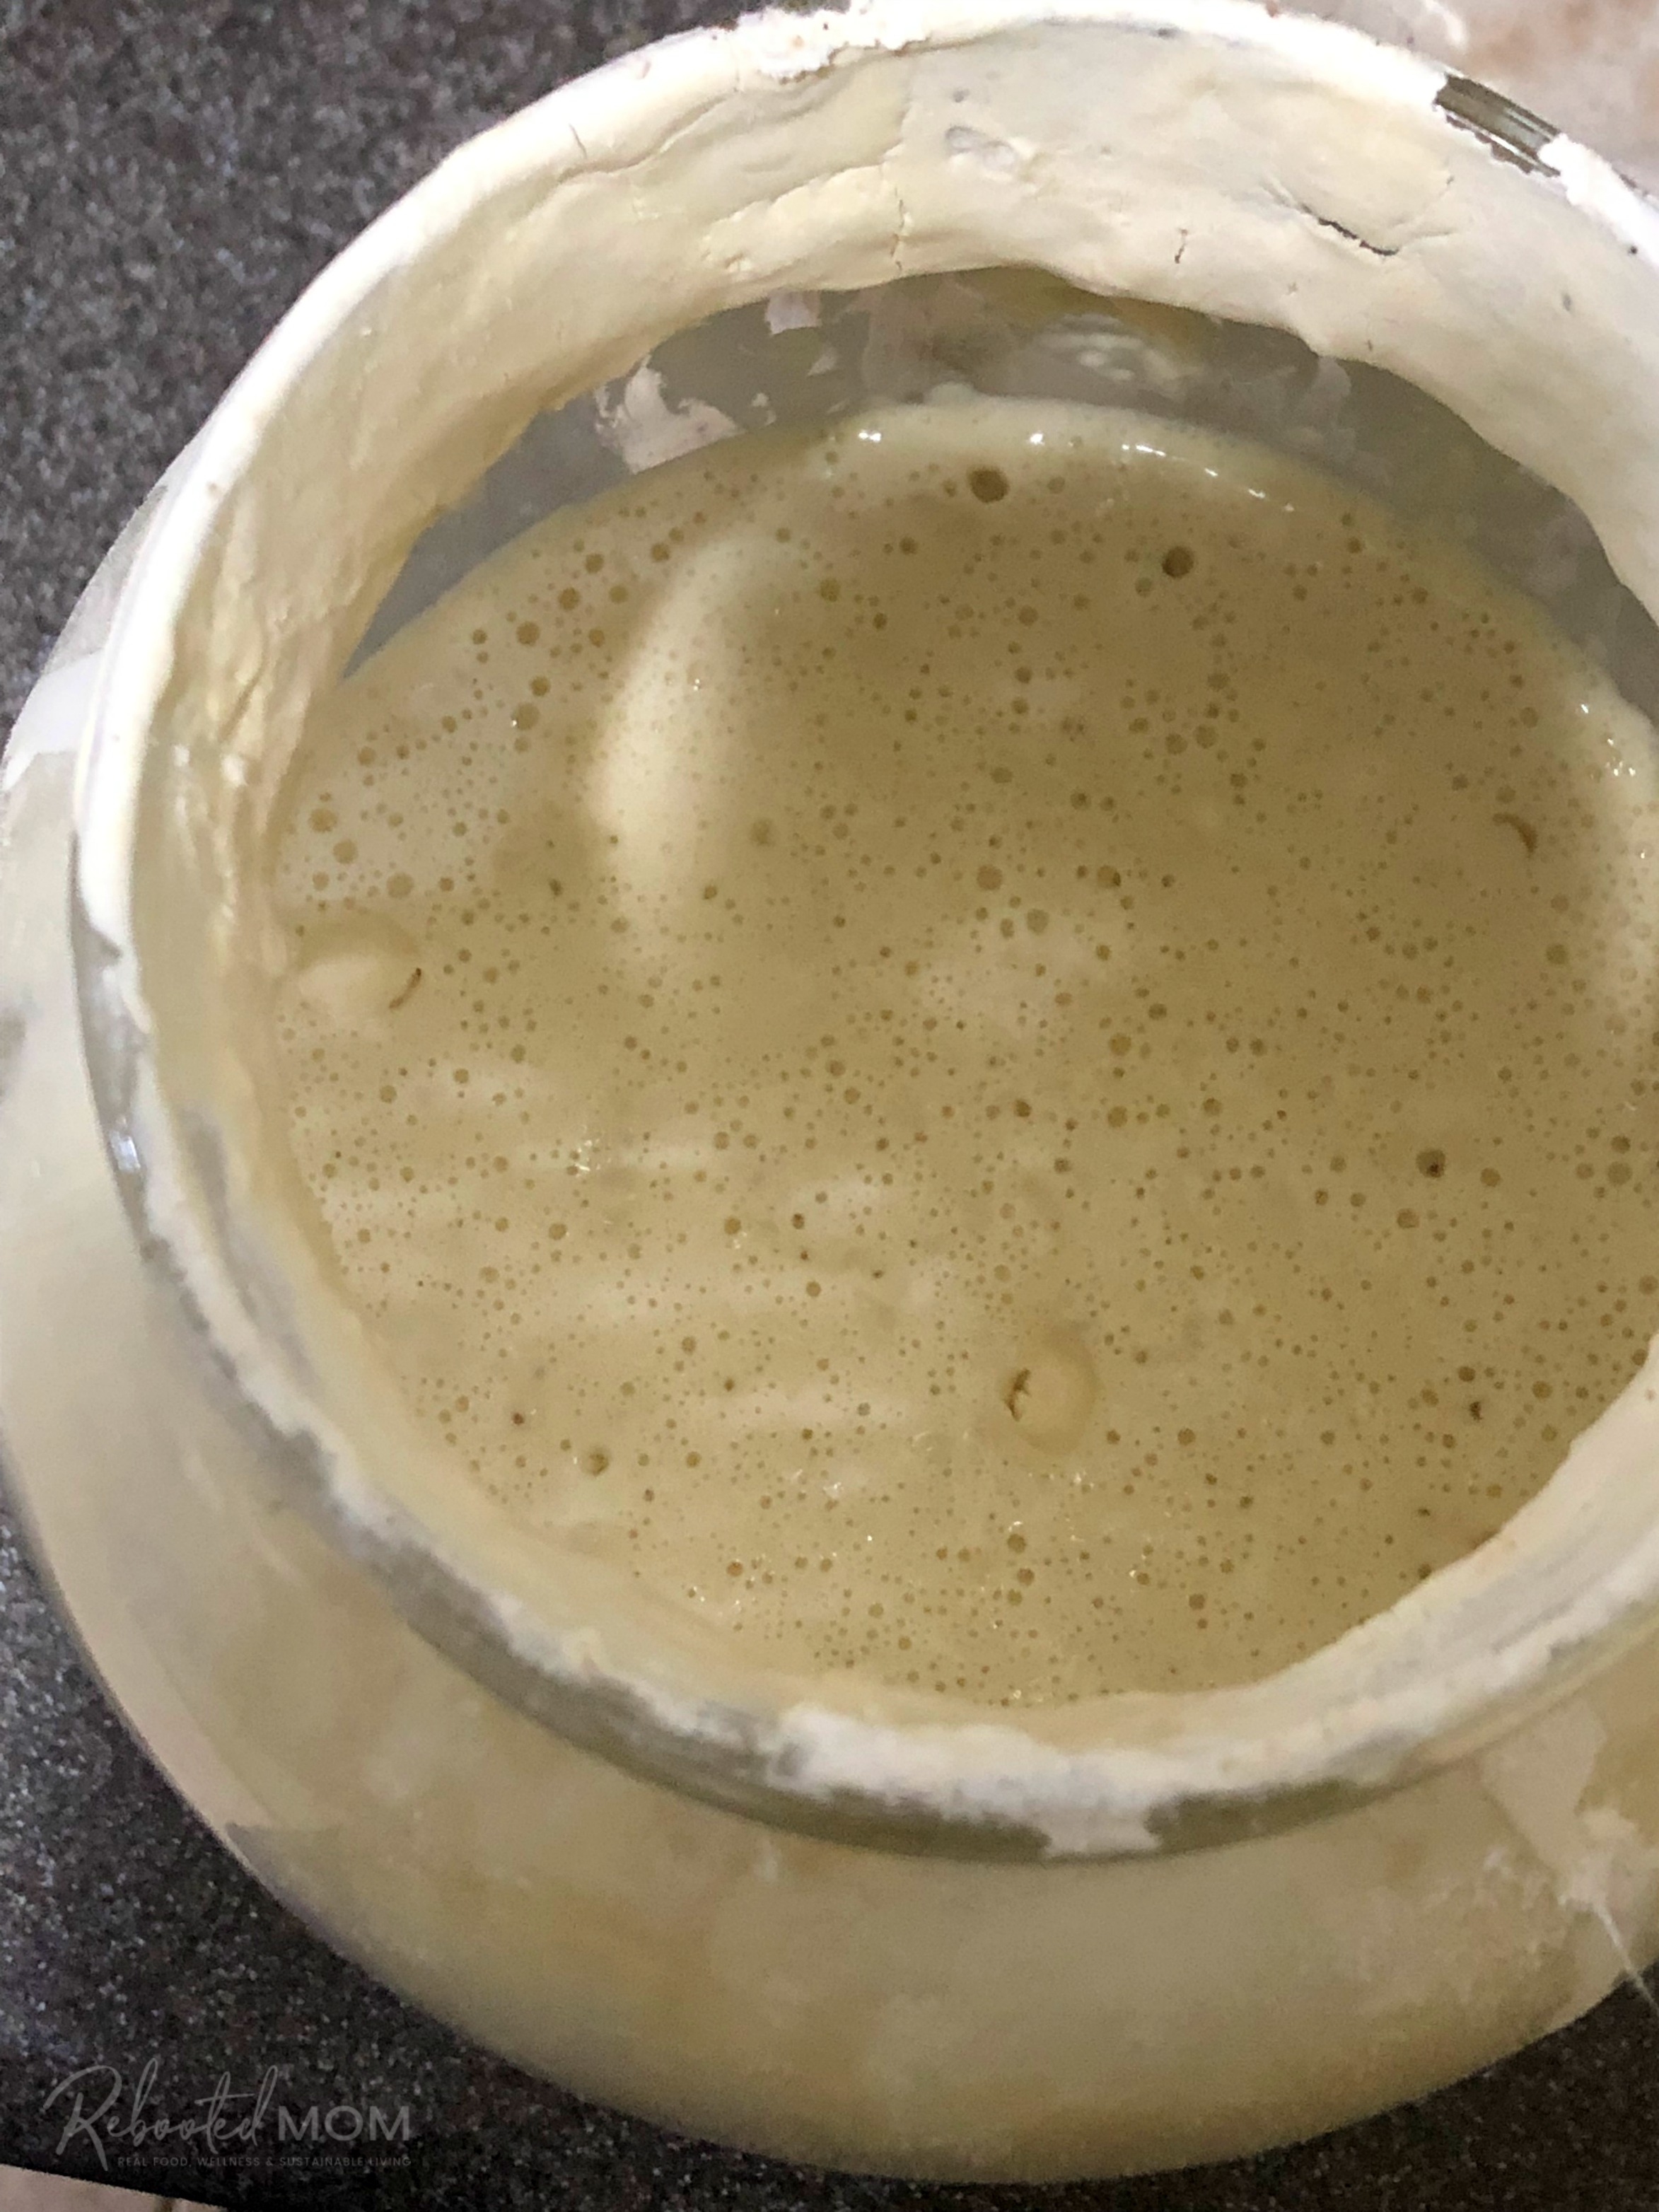 Bubbly sourdough starter \\ Easy homemade sourdough bagels you can make at home with your own active sourdough starter. This step by step tutorial makes the most delicious bagels!